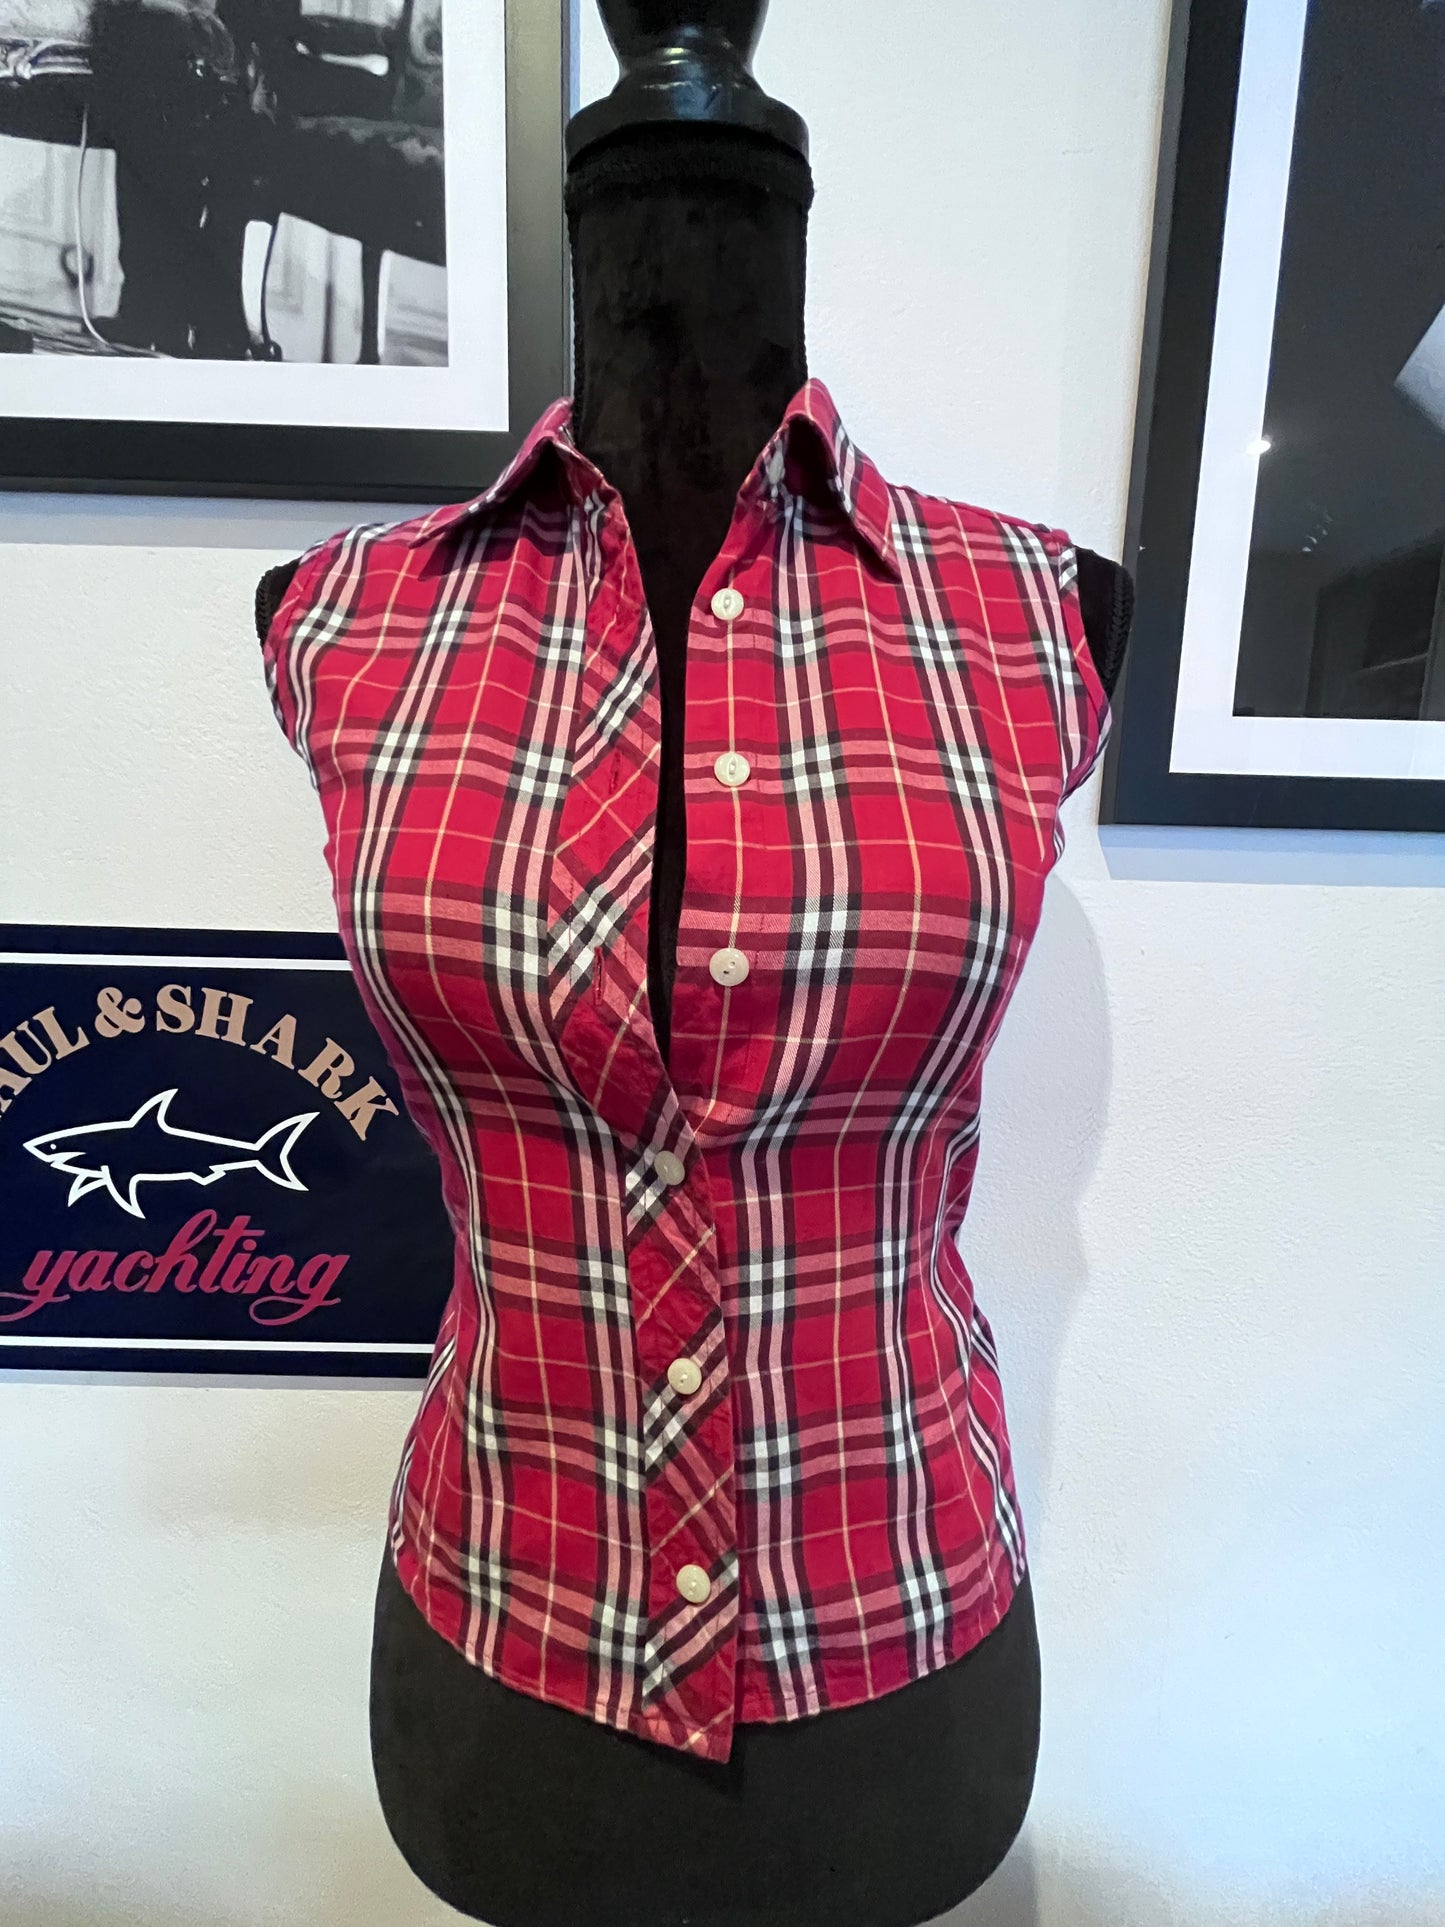 Burberry 100% Cotton Women’s Sleeveless Red Check Shirt Size Small